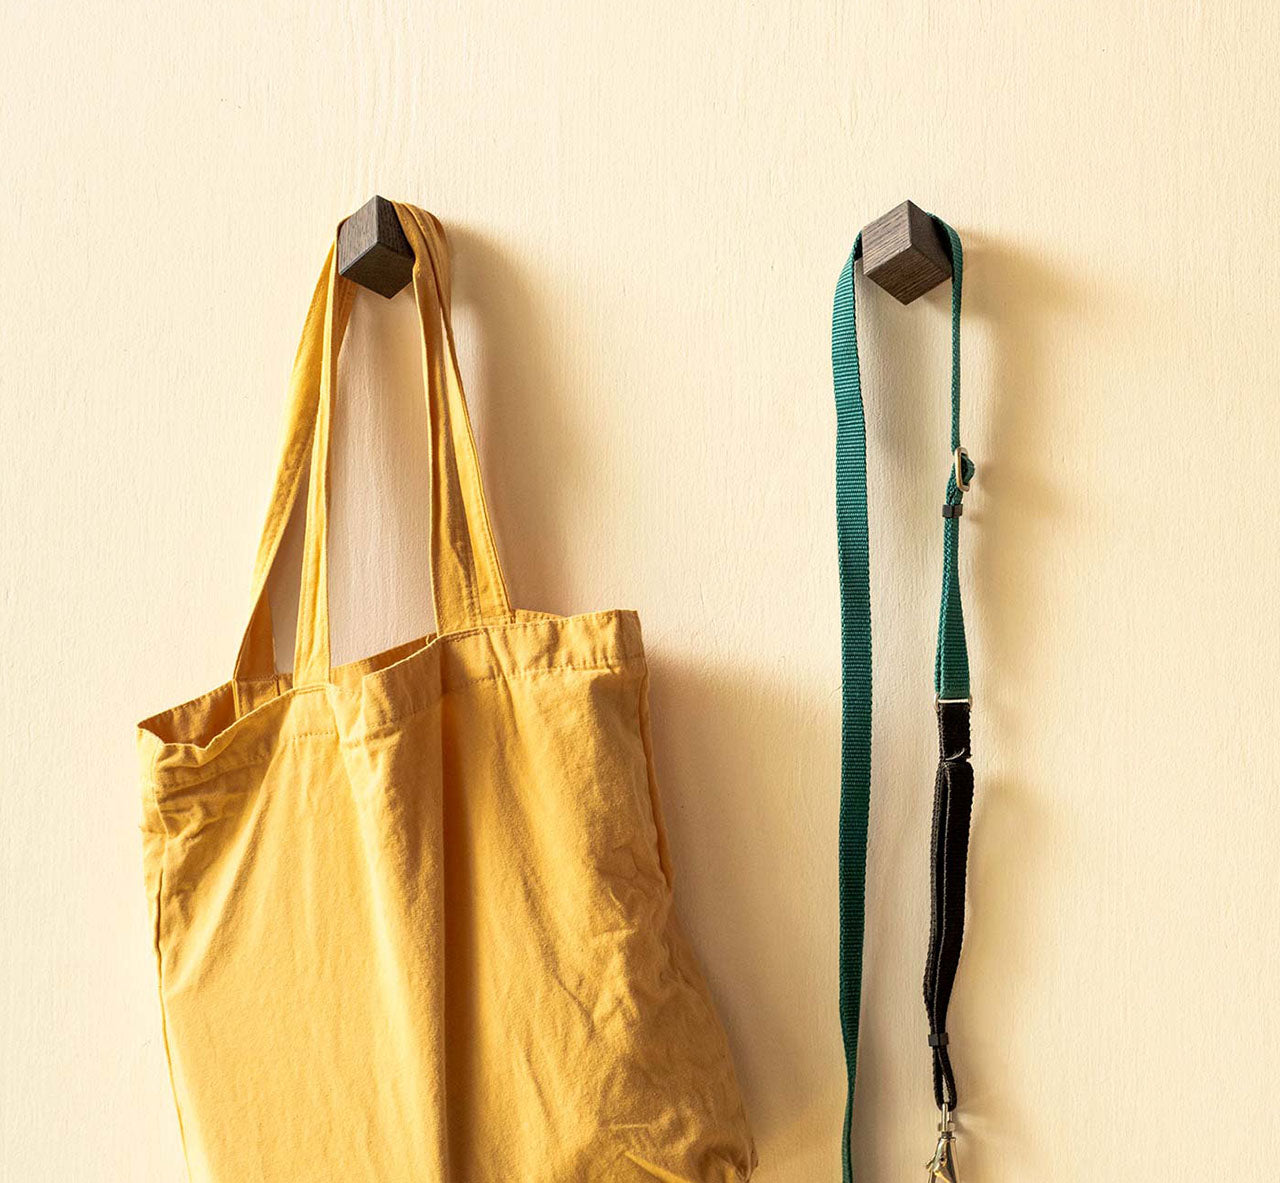 Yellow tote bag and green strap hanging on wooden hooks on a beige wall.